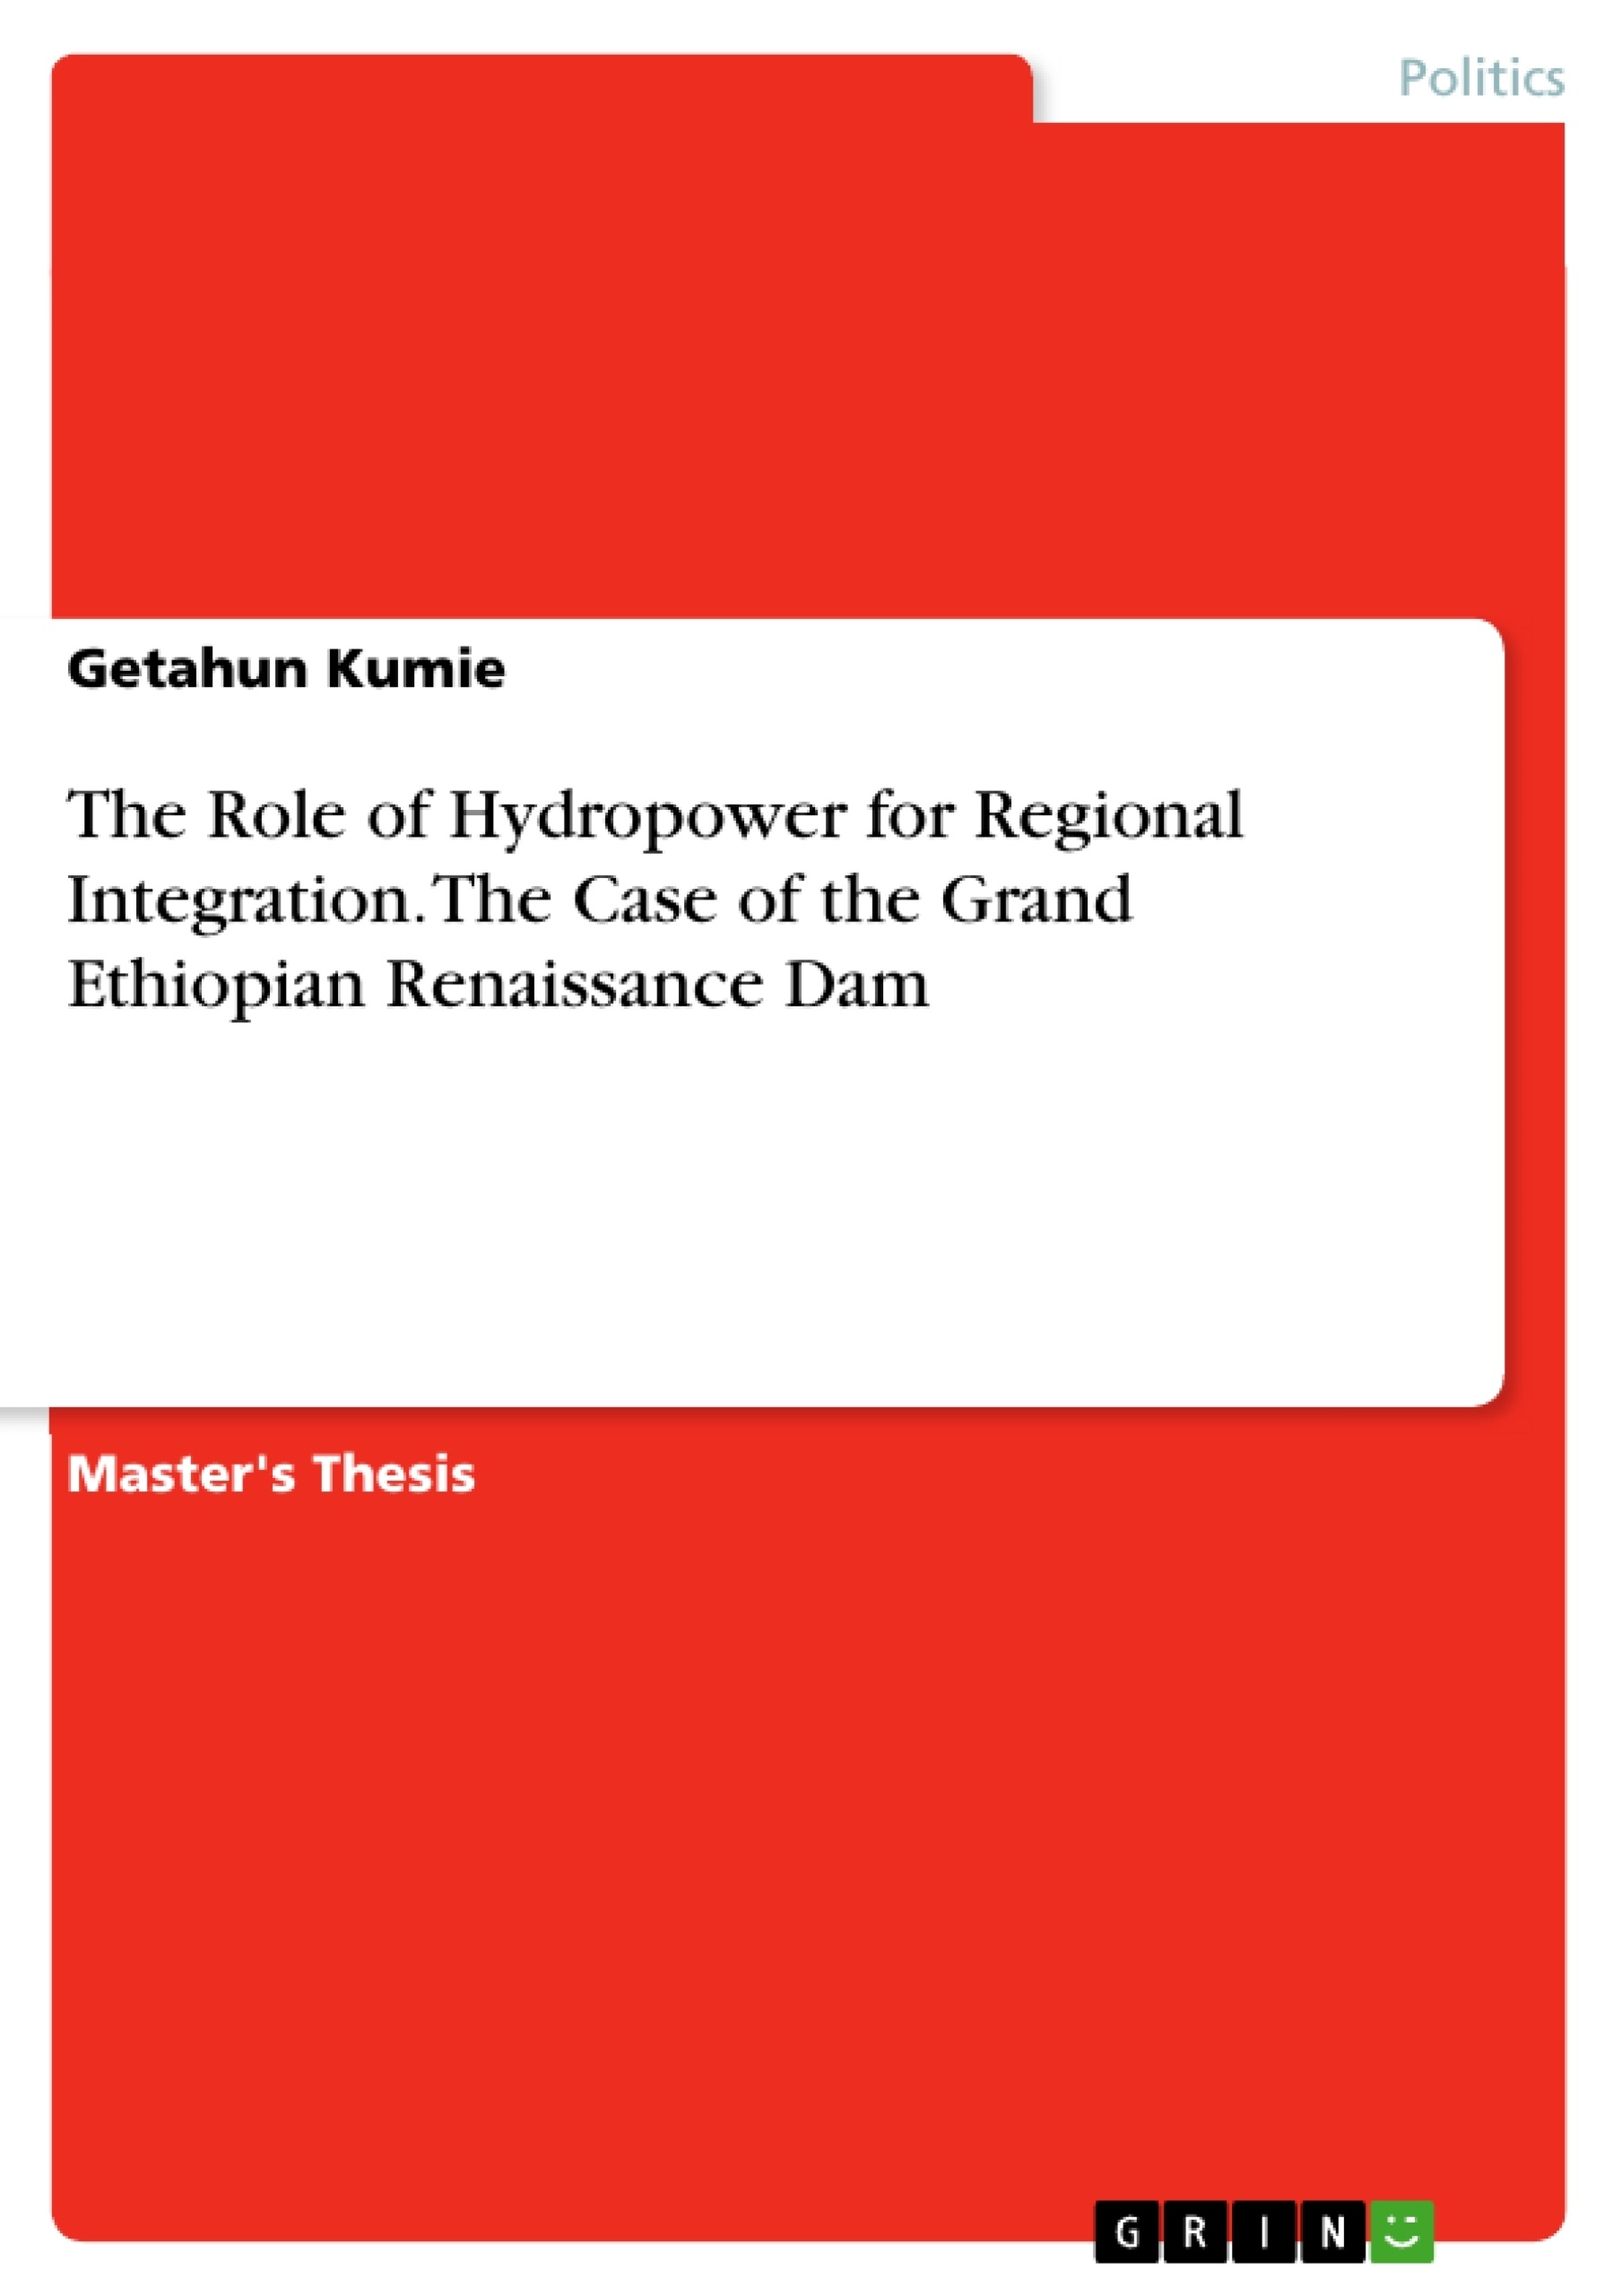 Title: The Role of Hydropower for Regional Integration. The Case of the Grand Ethiopian Renaissance Dam